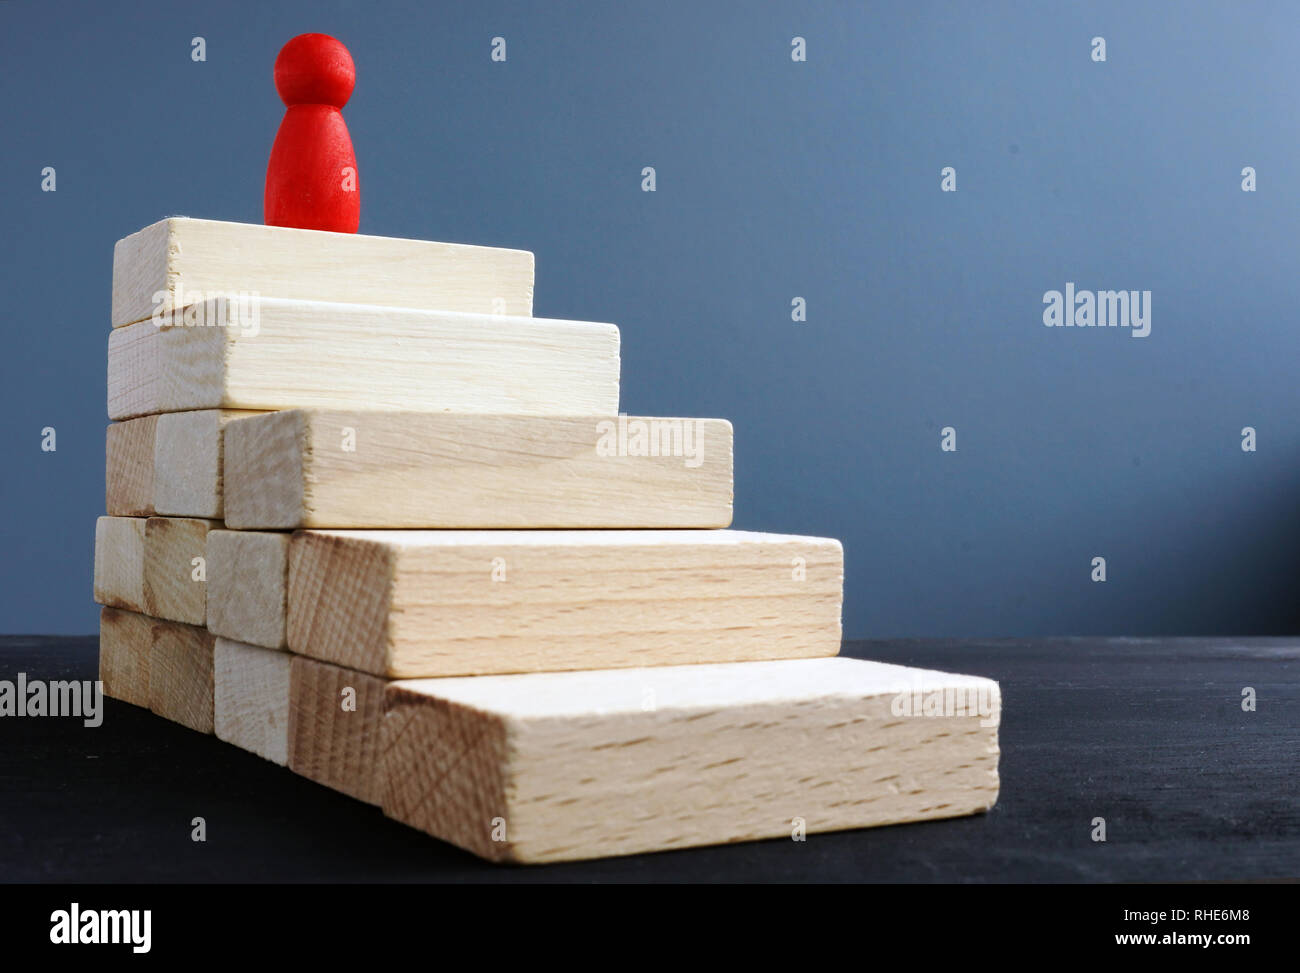 Ladder of success from wooden blocks. Ambitions and achievements concept. Stock Photo